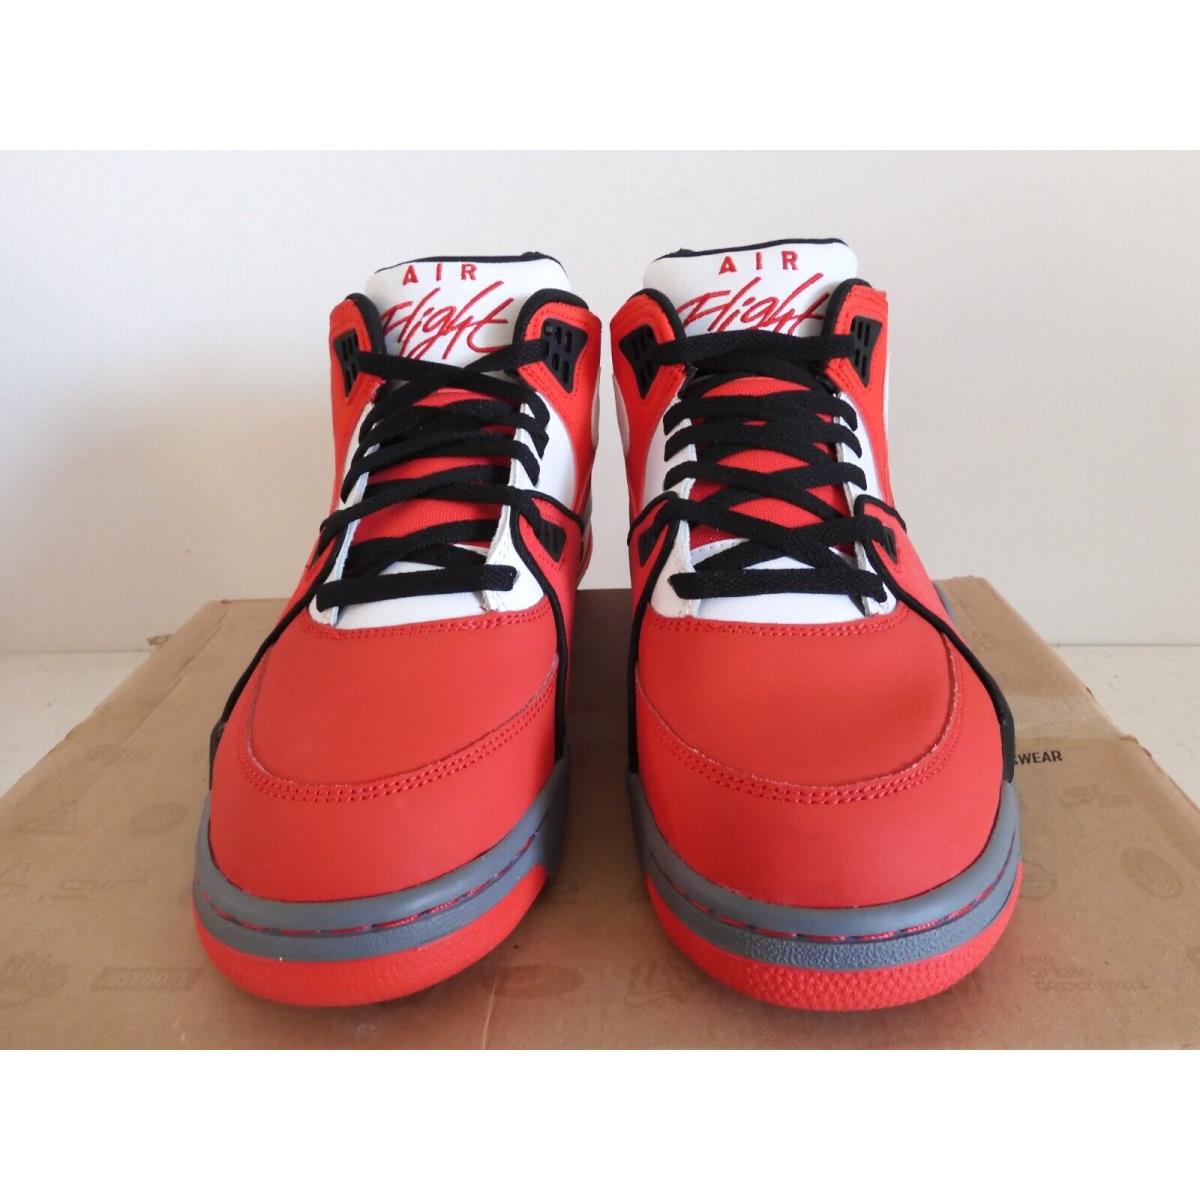 Nike shoes Air Flight - Red 1